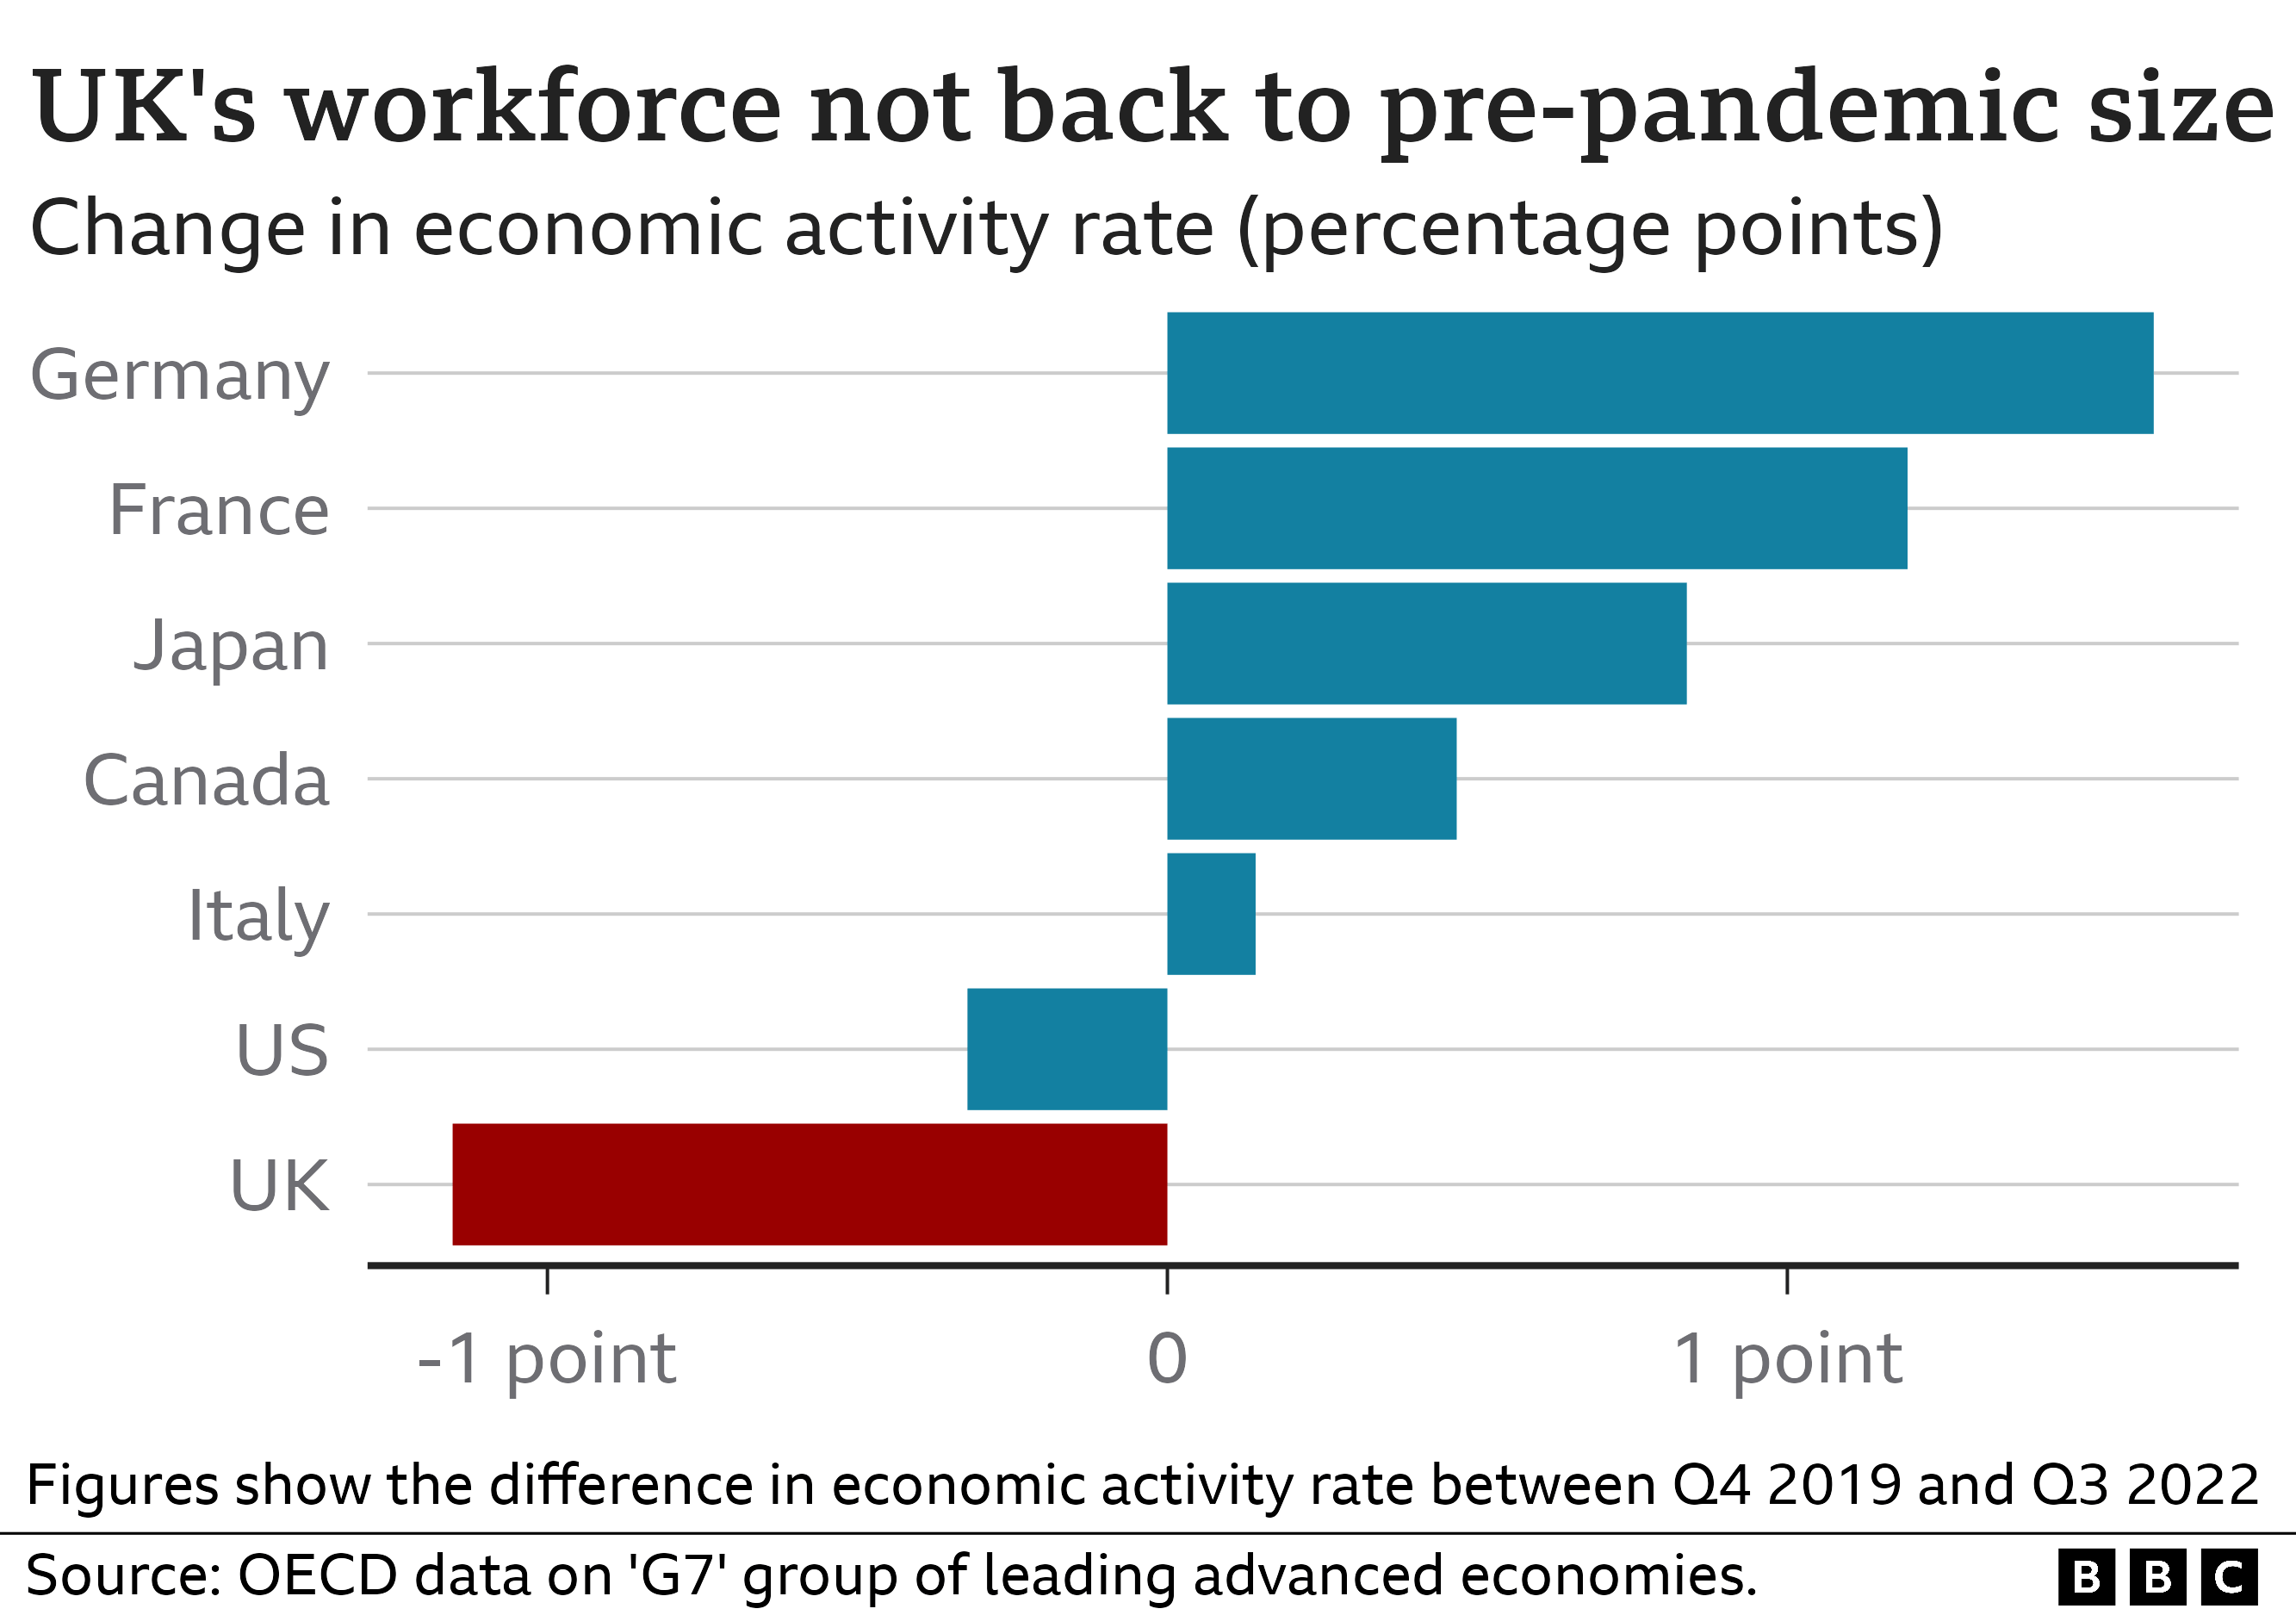 Changes in economic activity rate among leading advanced economies. The UK has seen the largest fall among G7 nations since pre-pandemic times.